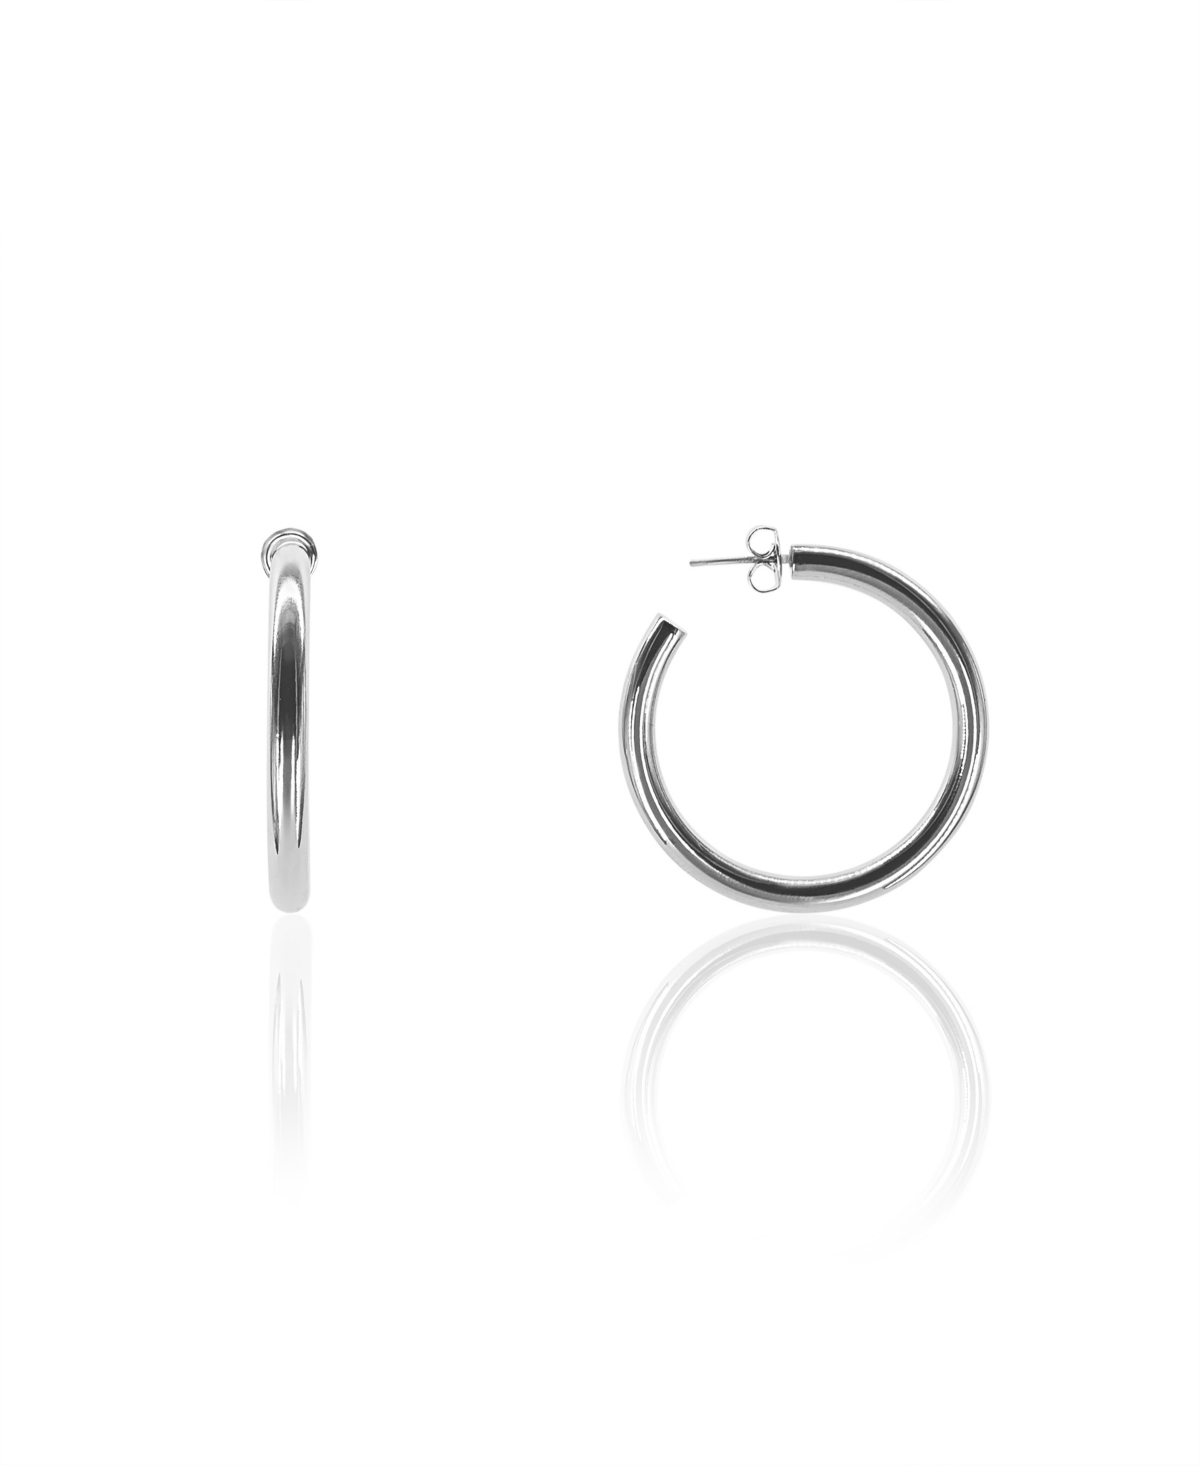 Liv 1 1/2" Medium Hoops in White Gold- Plated Brass, 40mm - Silver